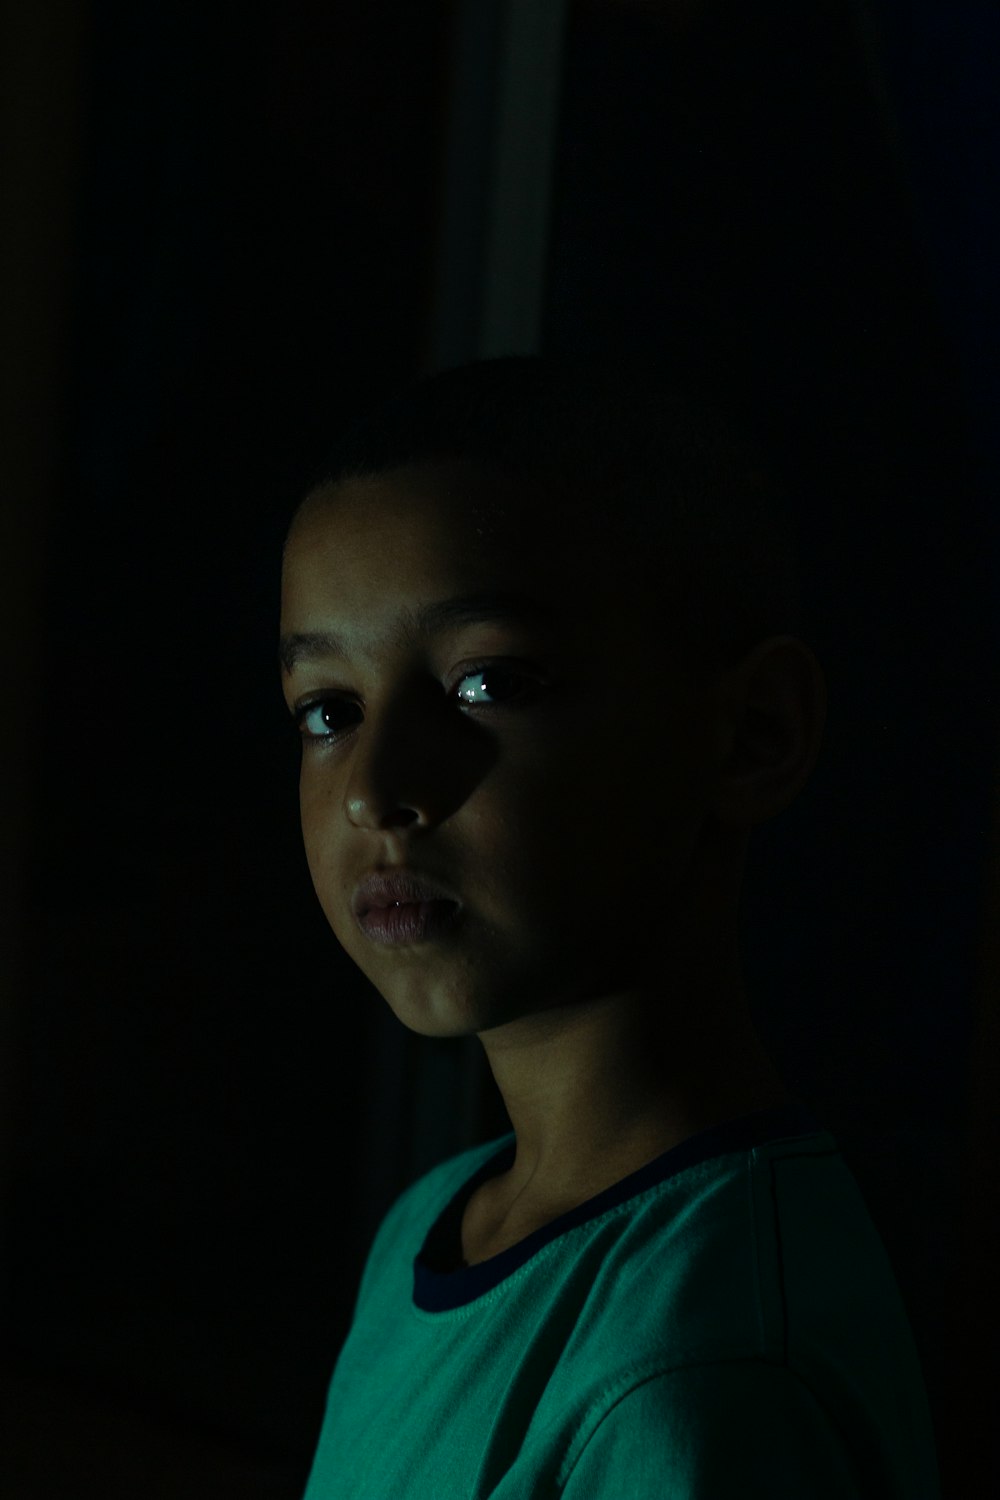 a young boy in a dark room looking at the camera